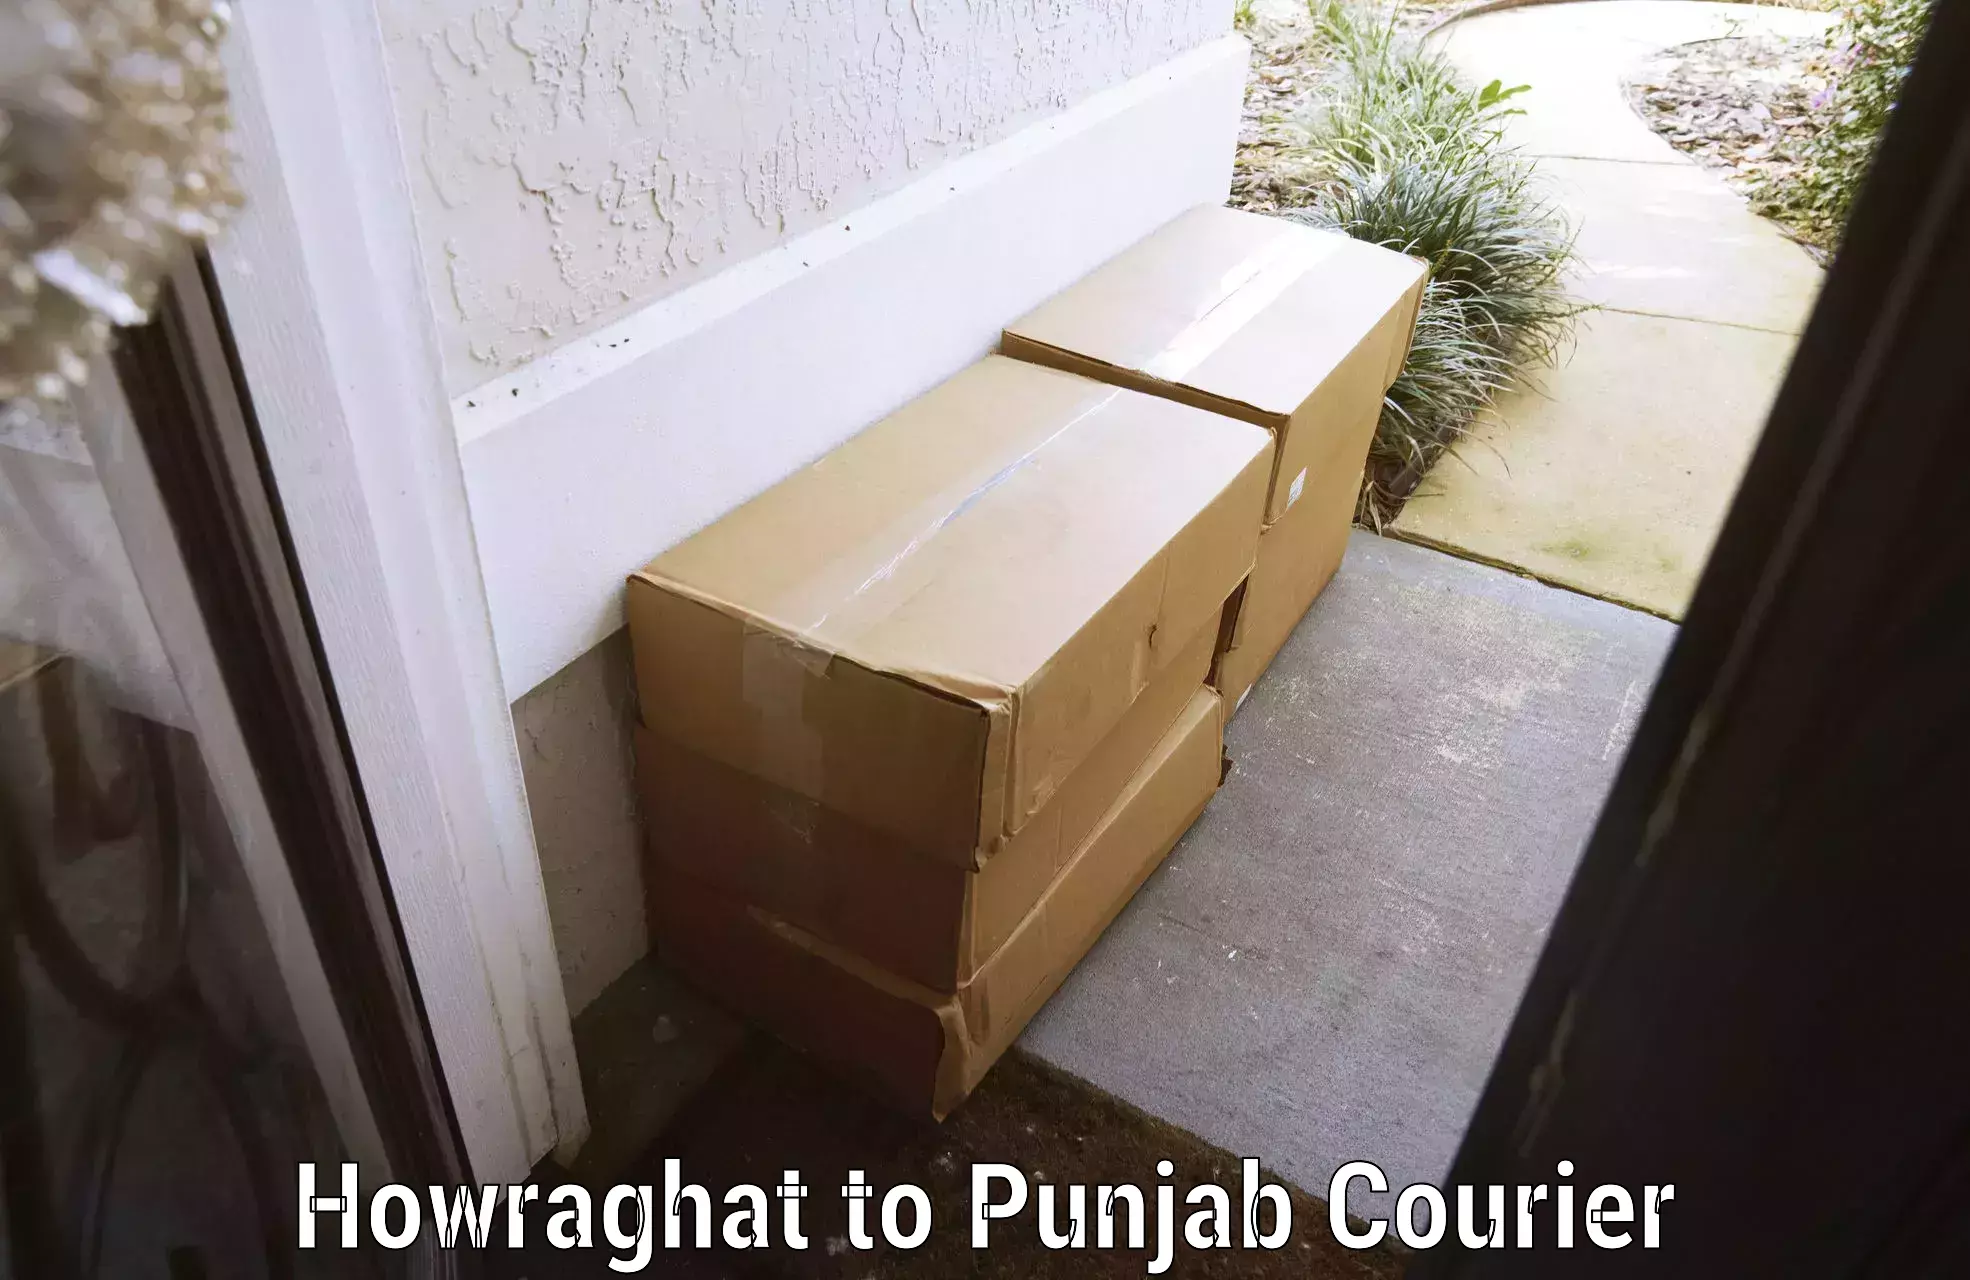 Automated luggage transport Howraghat to Punjab